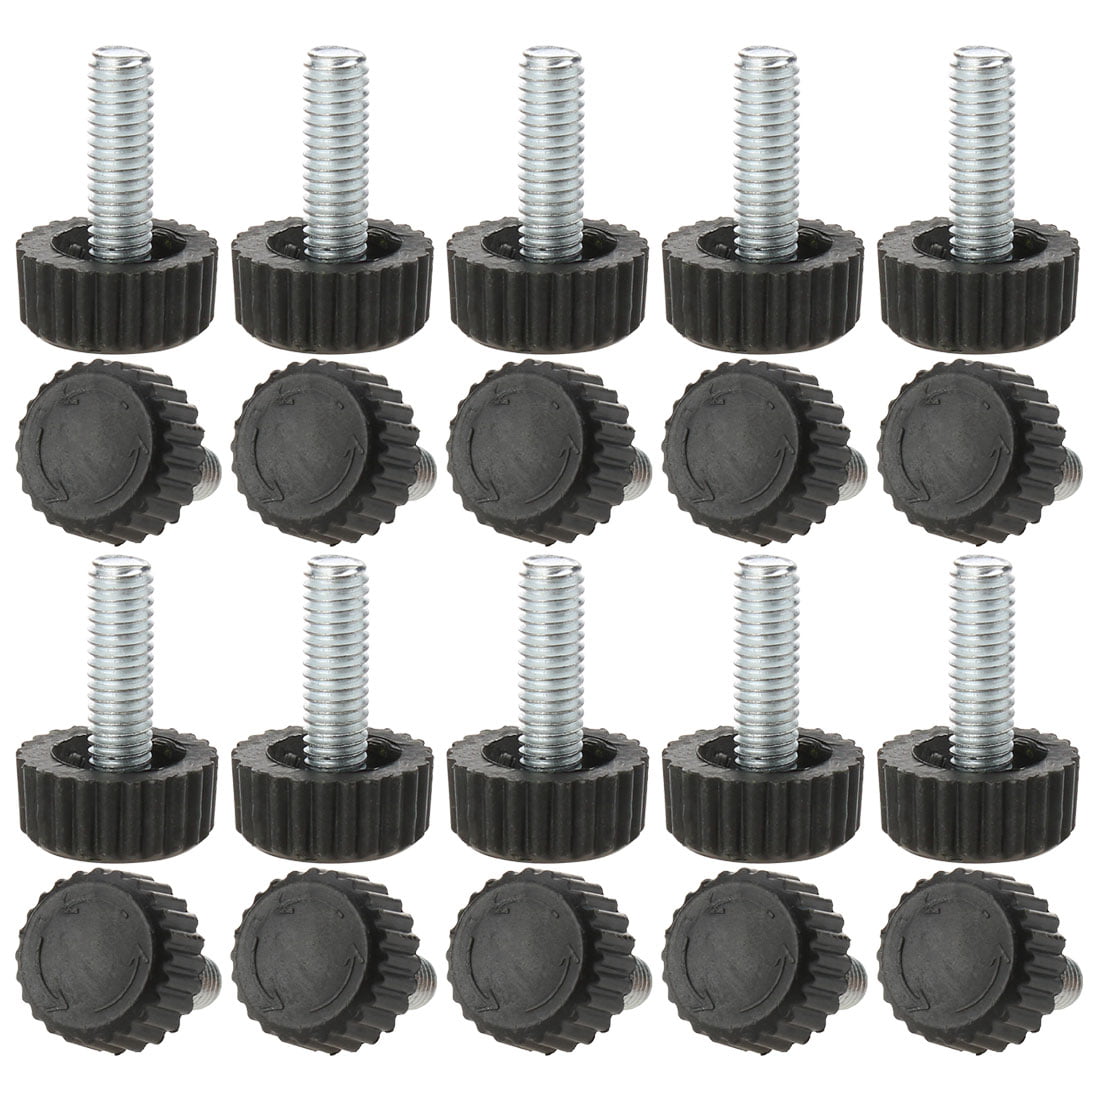 1-80X Furniture Table Cabinet Adjustable Screw Glides Legs Levelling Feet M8 